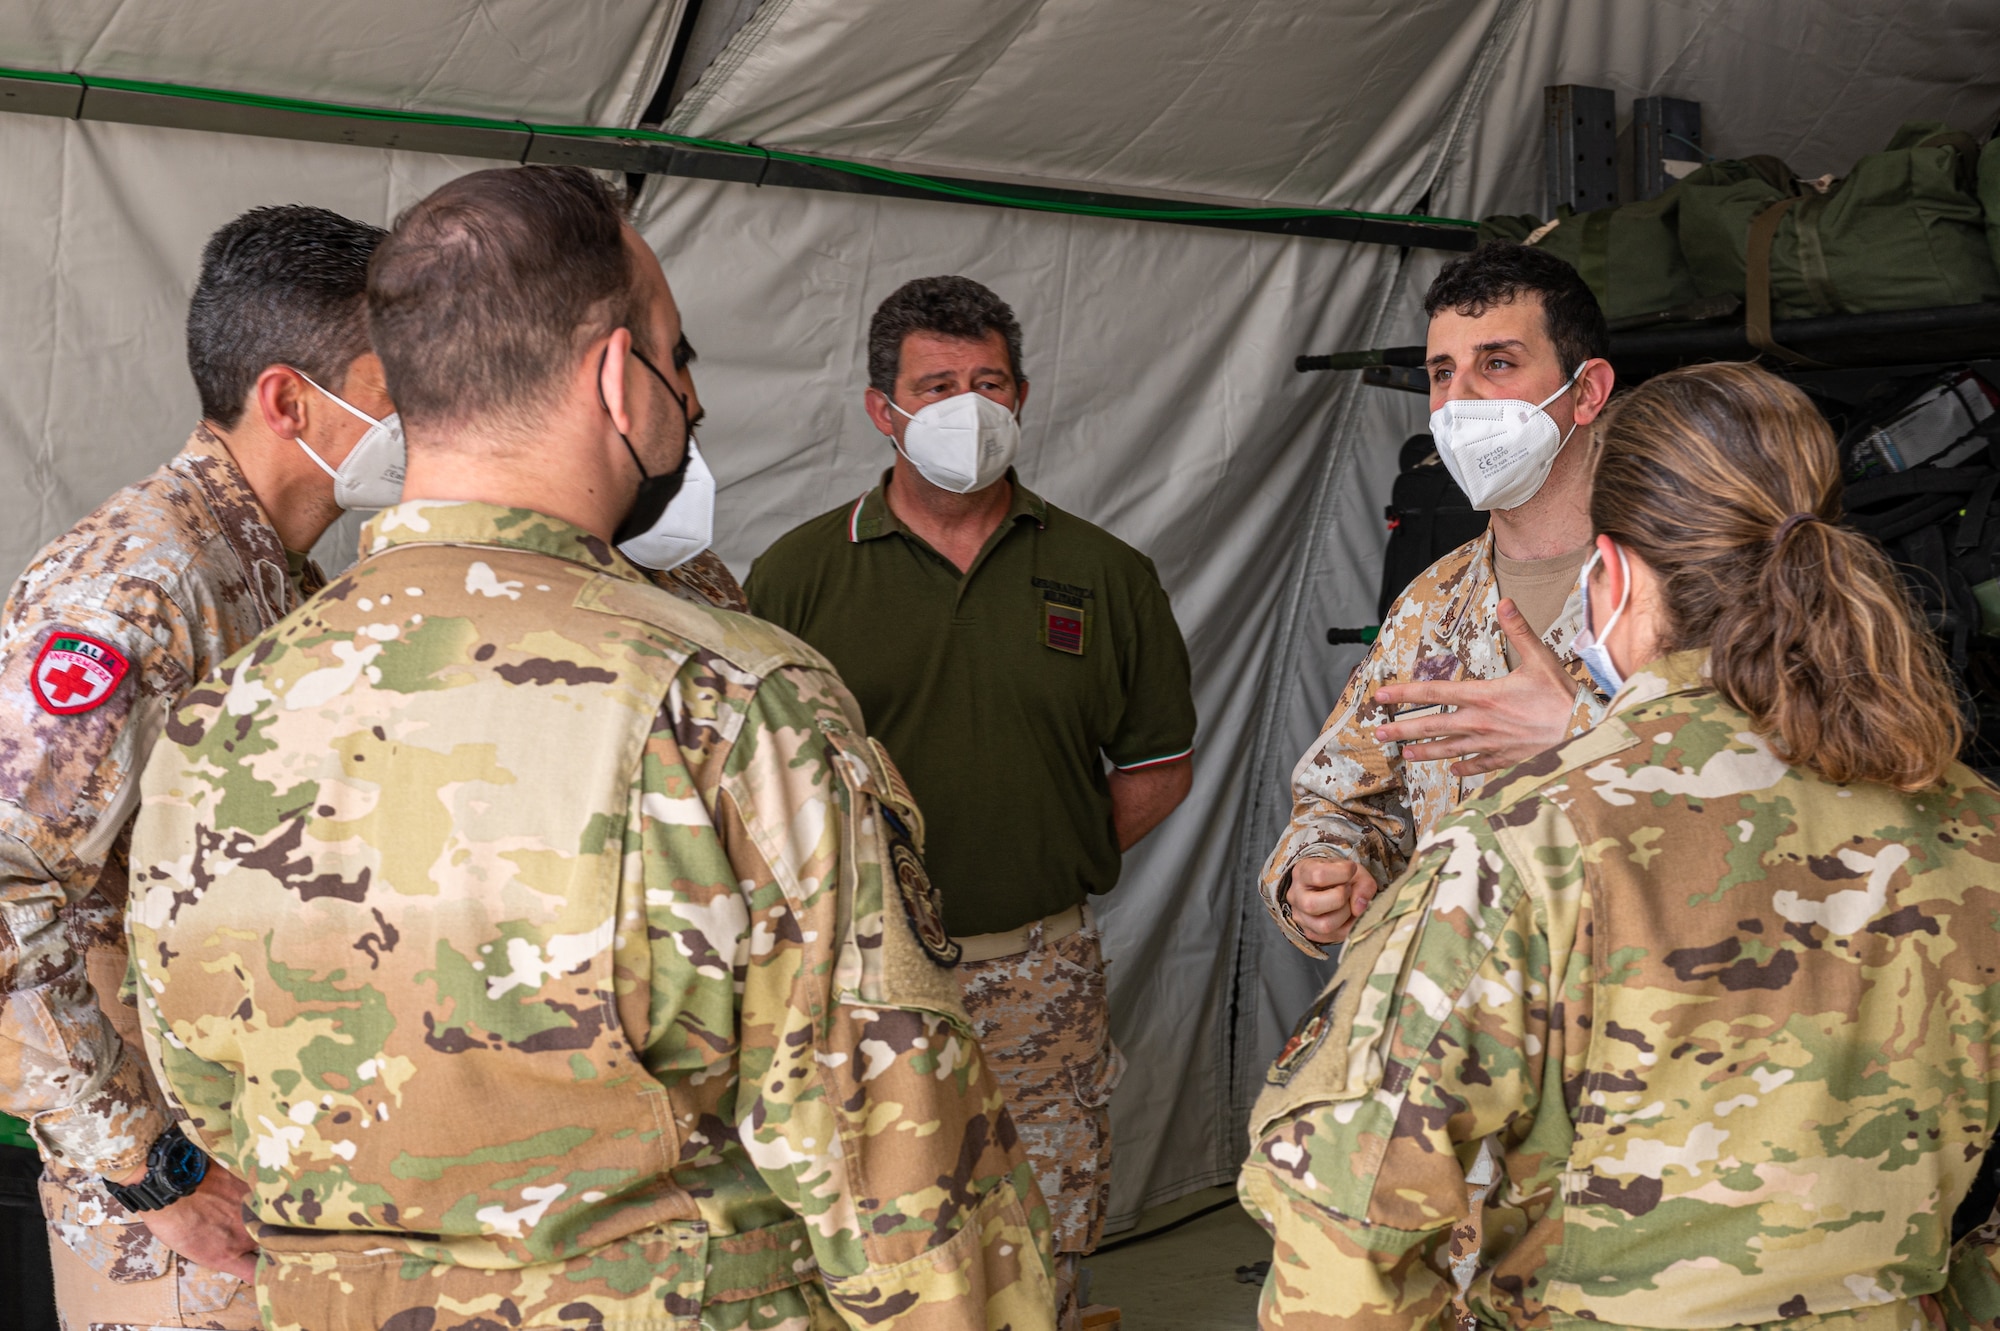 The 405th Expeditionary Aeromedical Evacuation Squadron opened its doors for the Italian Air Force Aeromedical Evacuation counterparts on March 23, 2022, showcasing its capabilities, processes and set up of the C-130 Hercules aircraft for medical evacuations.